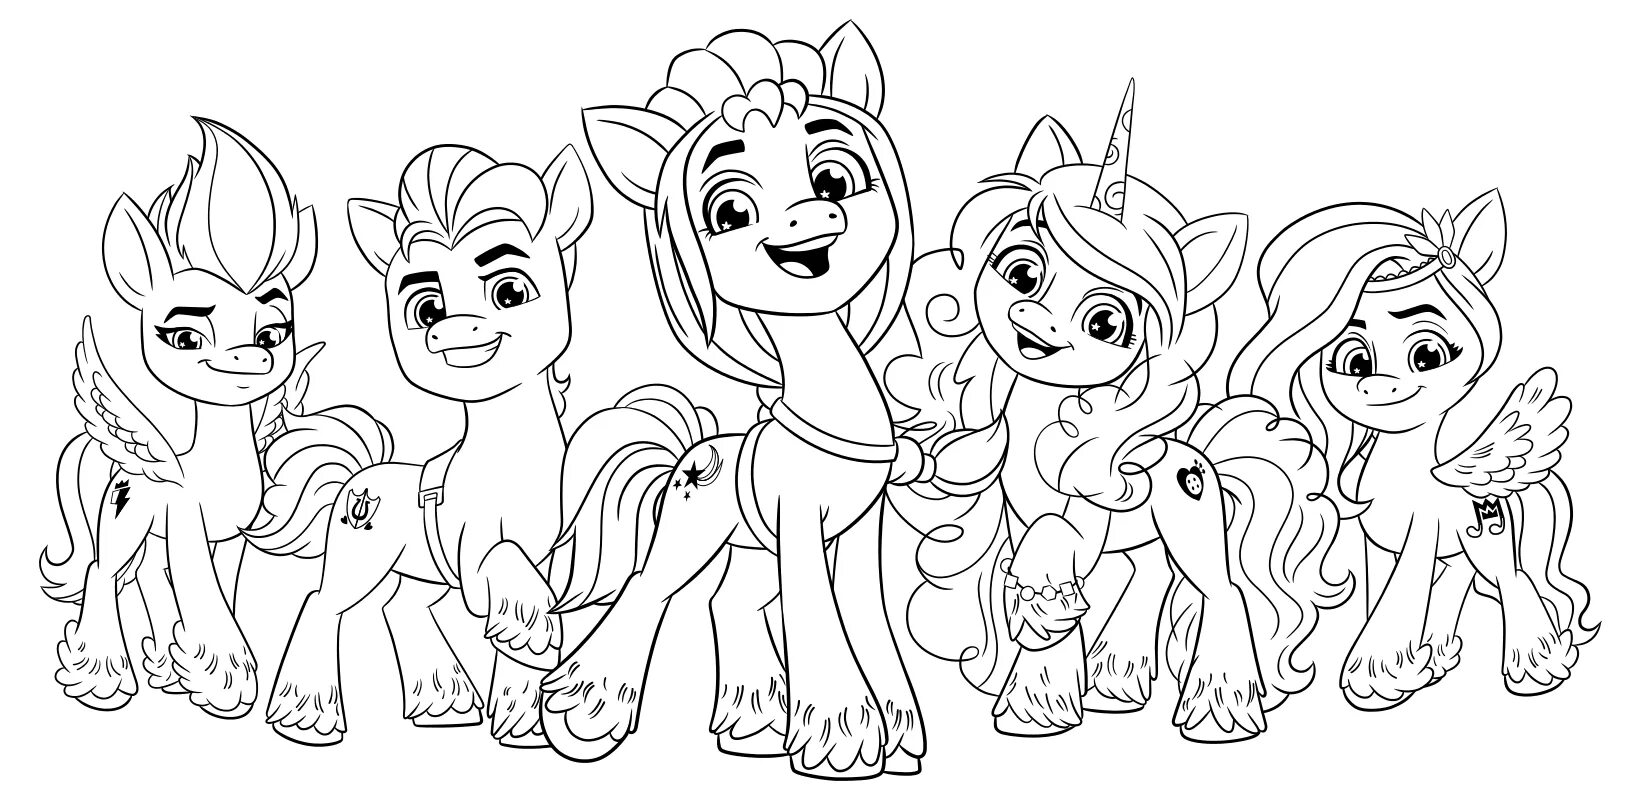 Sunny sparkling pony coloring page